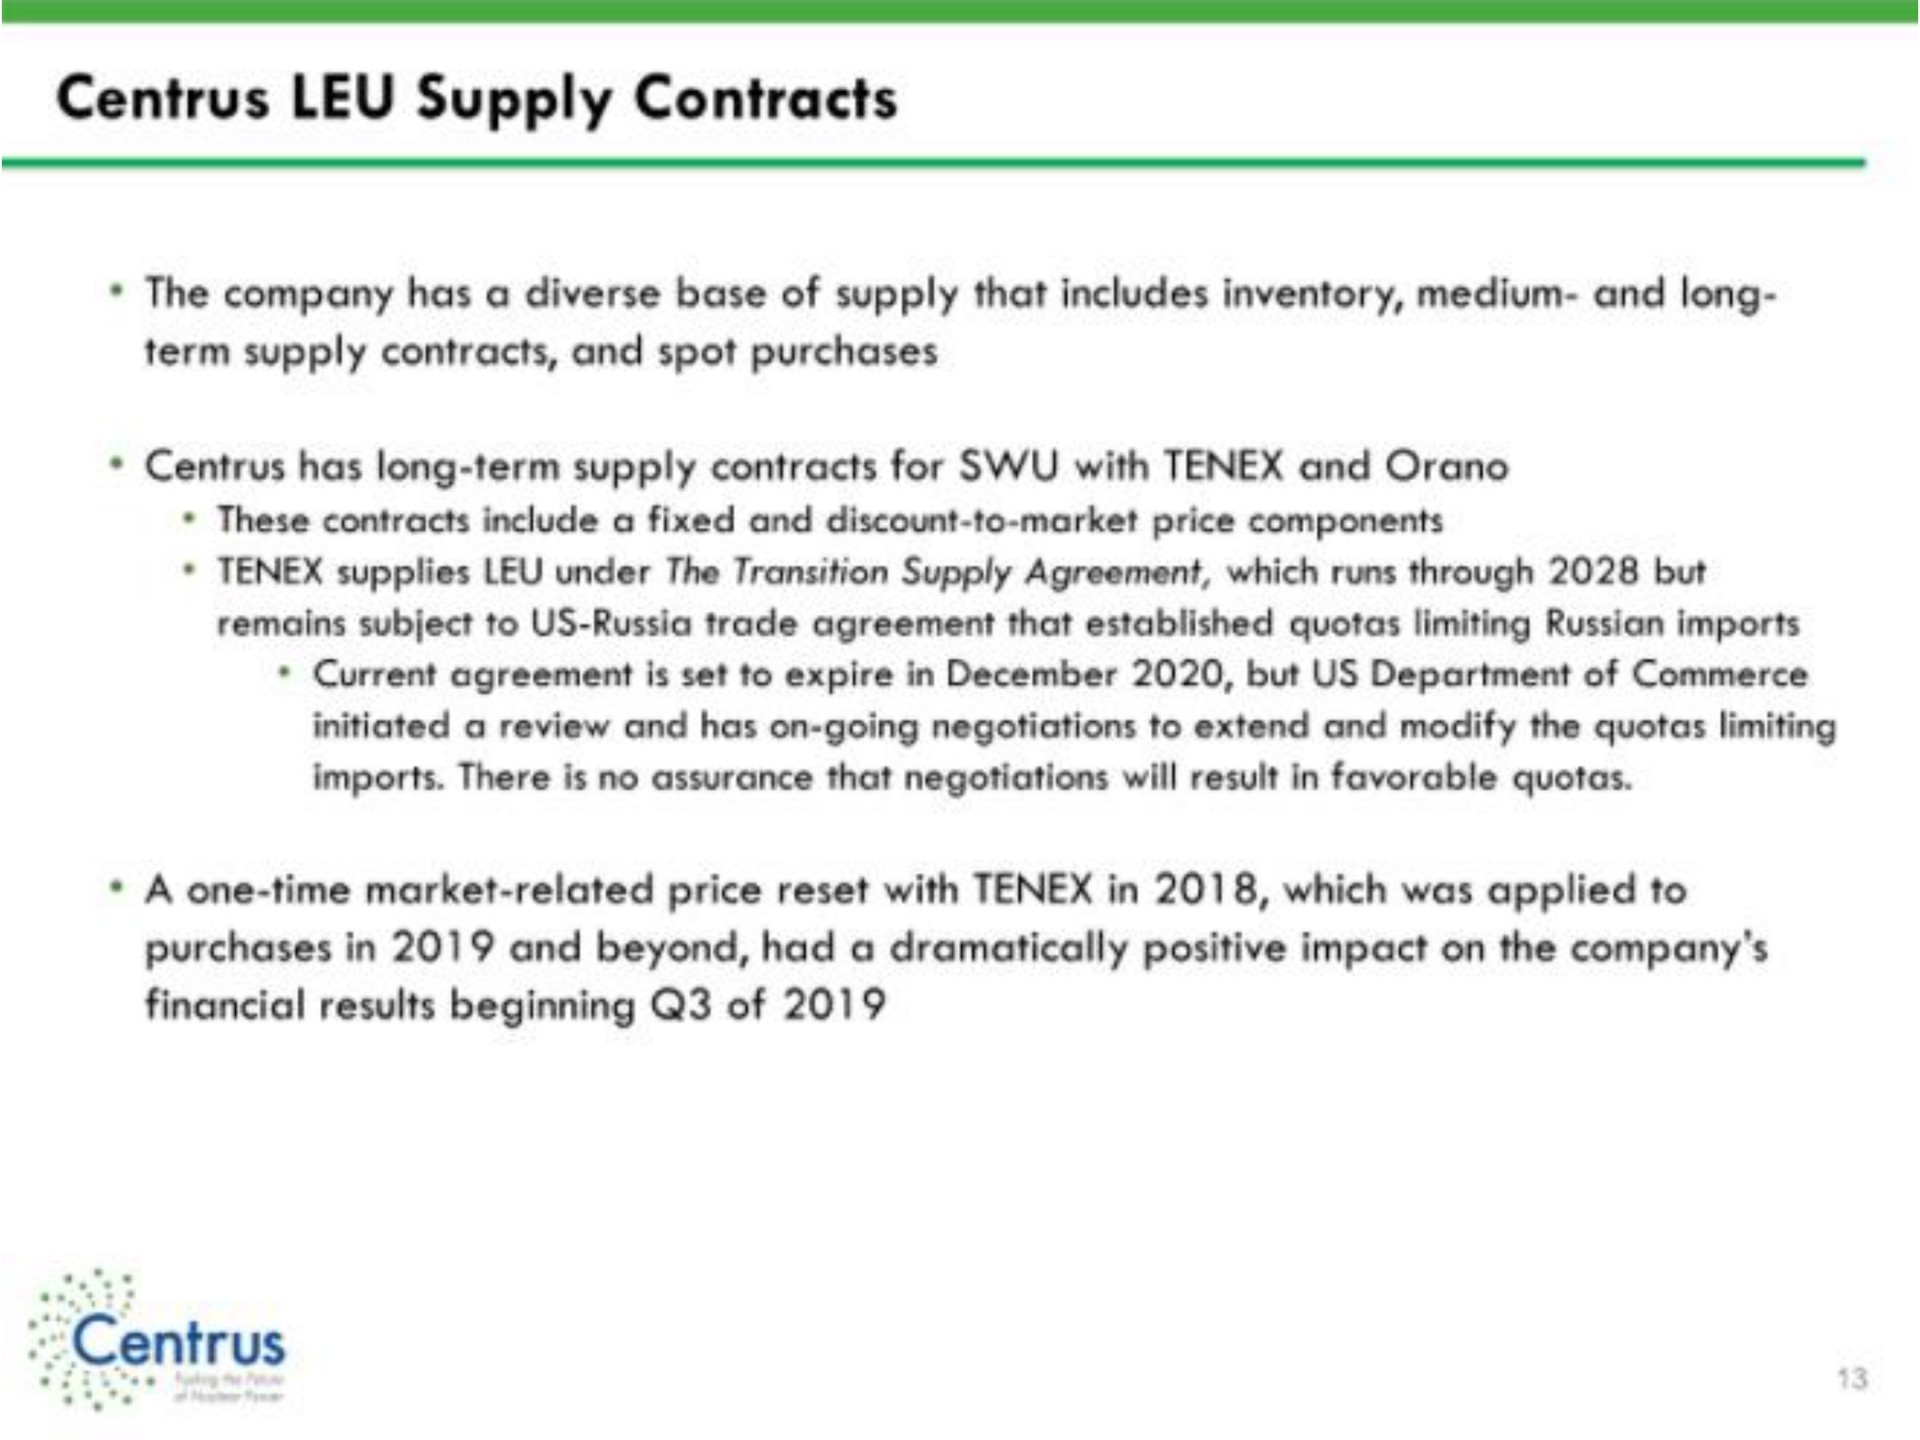 leu supply contracts the company has a diverse base of supply that includes inventory medium and long term supply contracts and spot purchases has long term supply contracts for with and a one time market related price reset with in which was applied to purchases in and beyond had a dramatically positive impact on the company financial results beginning of | Centrus